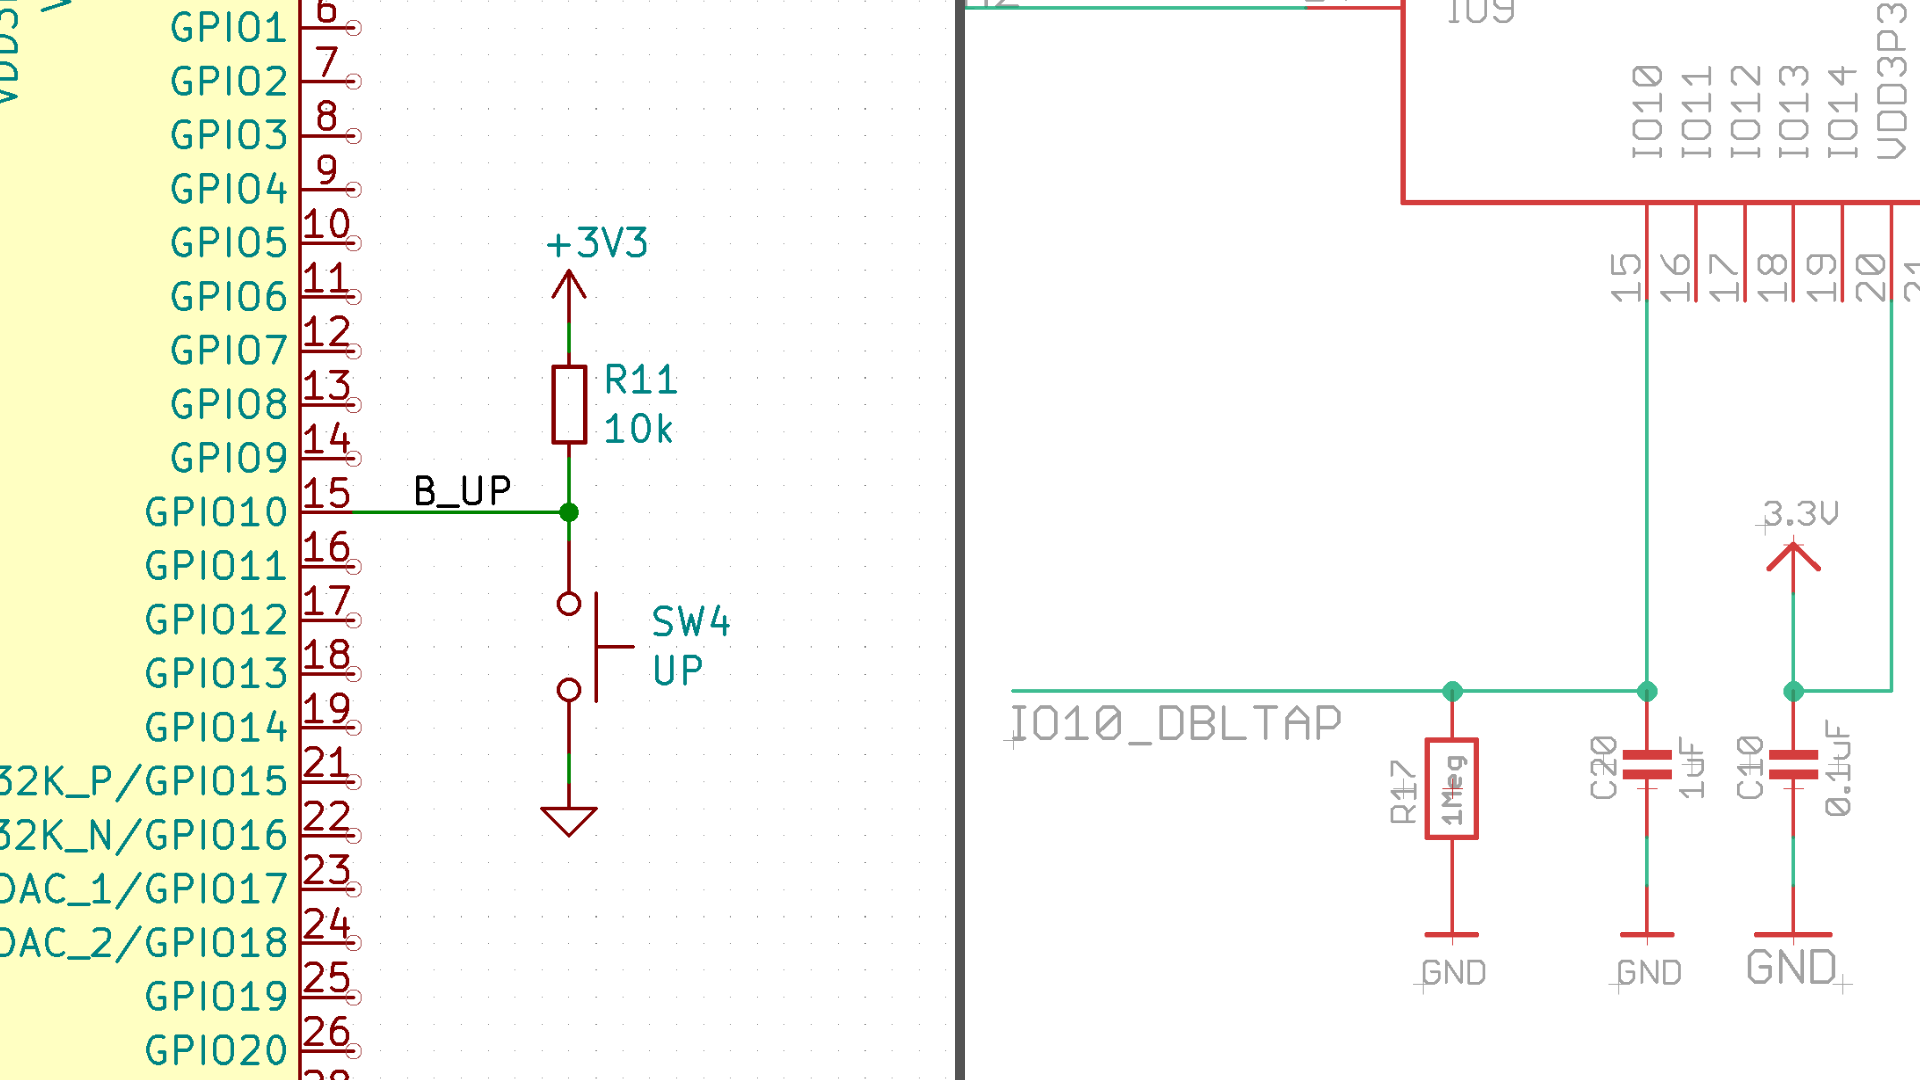 On the left: schematic of my board showing the GPIO10 pin connected to a button that is pulled up to 3V3, so normally high. On the right: schematic of the QT Py S2 board with an RC circuit connected to GPIO10